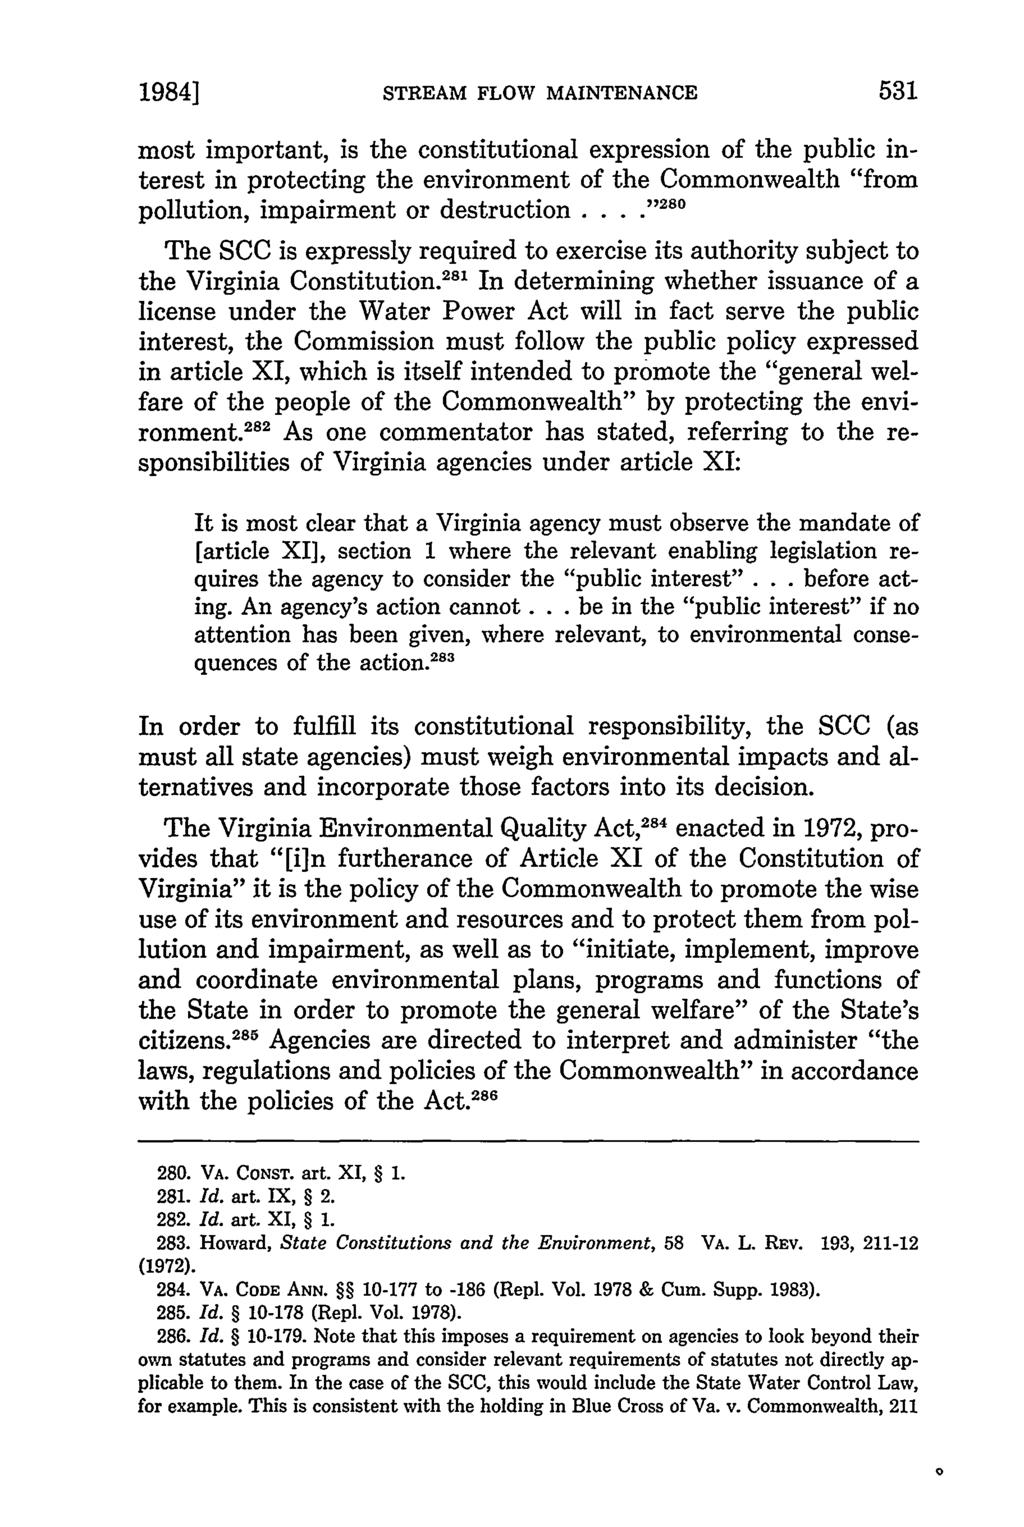 1984] STREAM FLOW MAINTENANCE most important, is the constitutional expression of the public interest in protecting the environment of the Commonwealth "from pollution, impairment or destruction..2.8. The SCC is expressly required to exercise its authority subject to the Virginia Constitution.